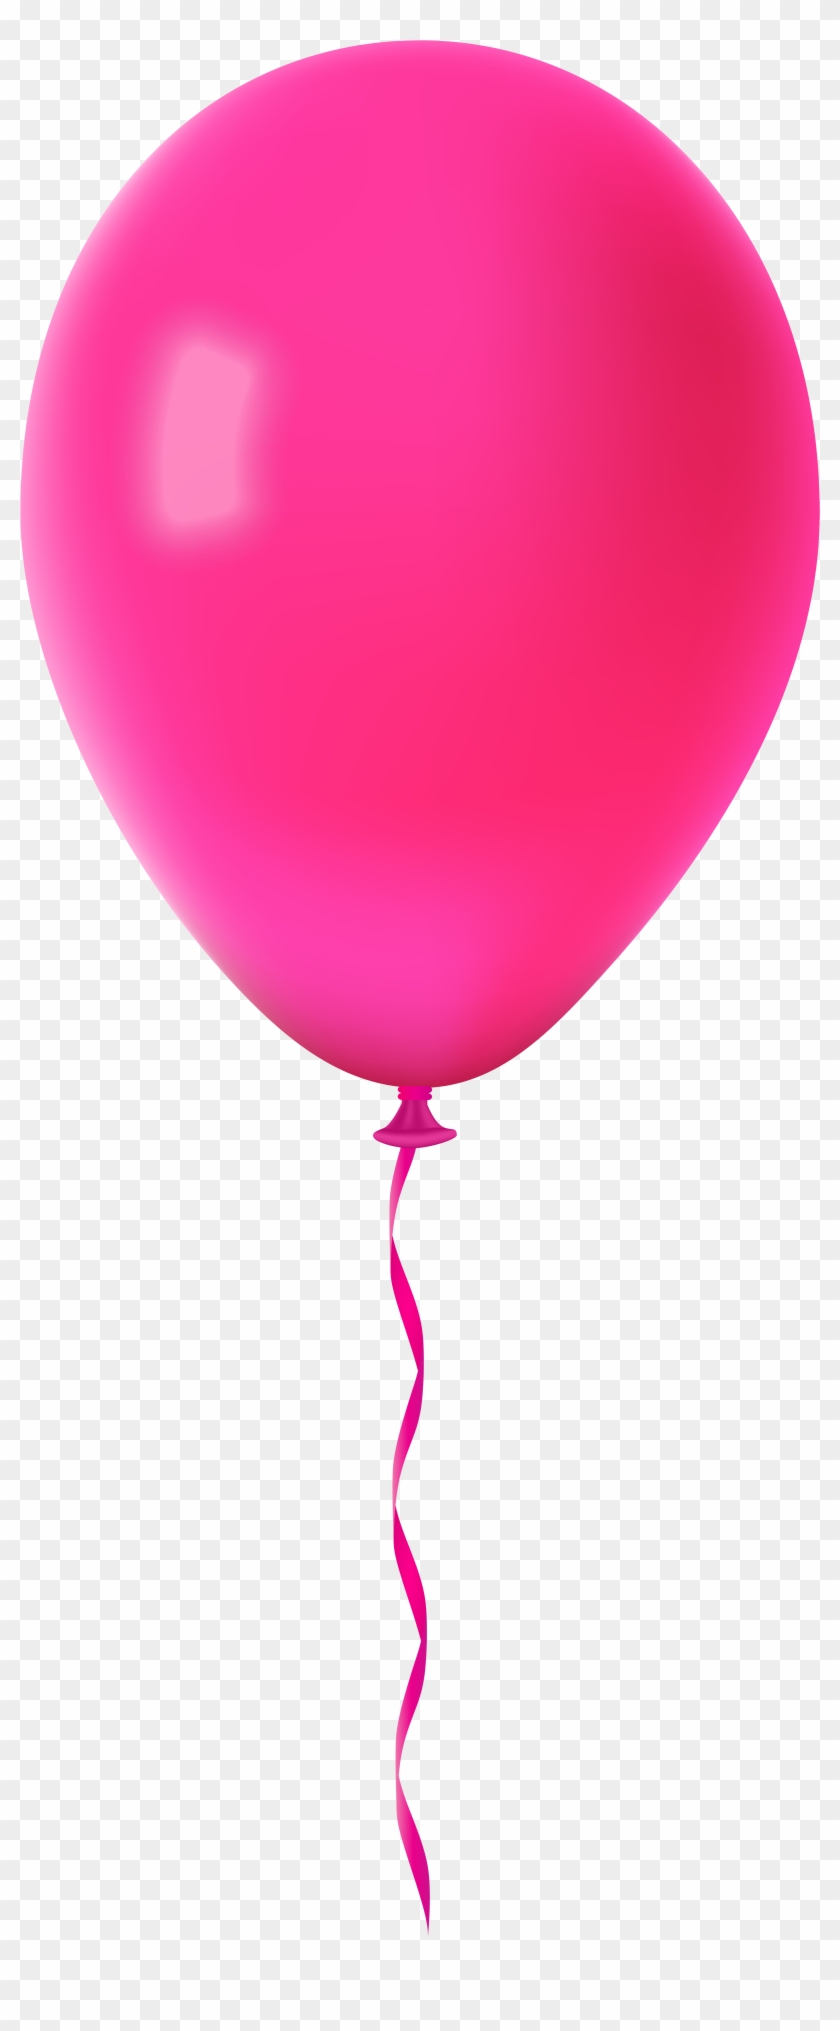 Pink Balloon Transparent Png Clip Art Image - Red Balloon Png #1120680